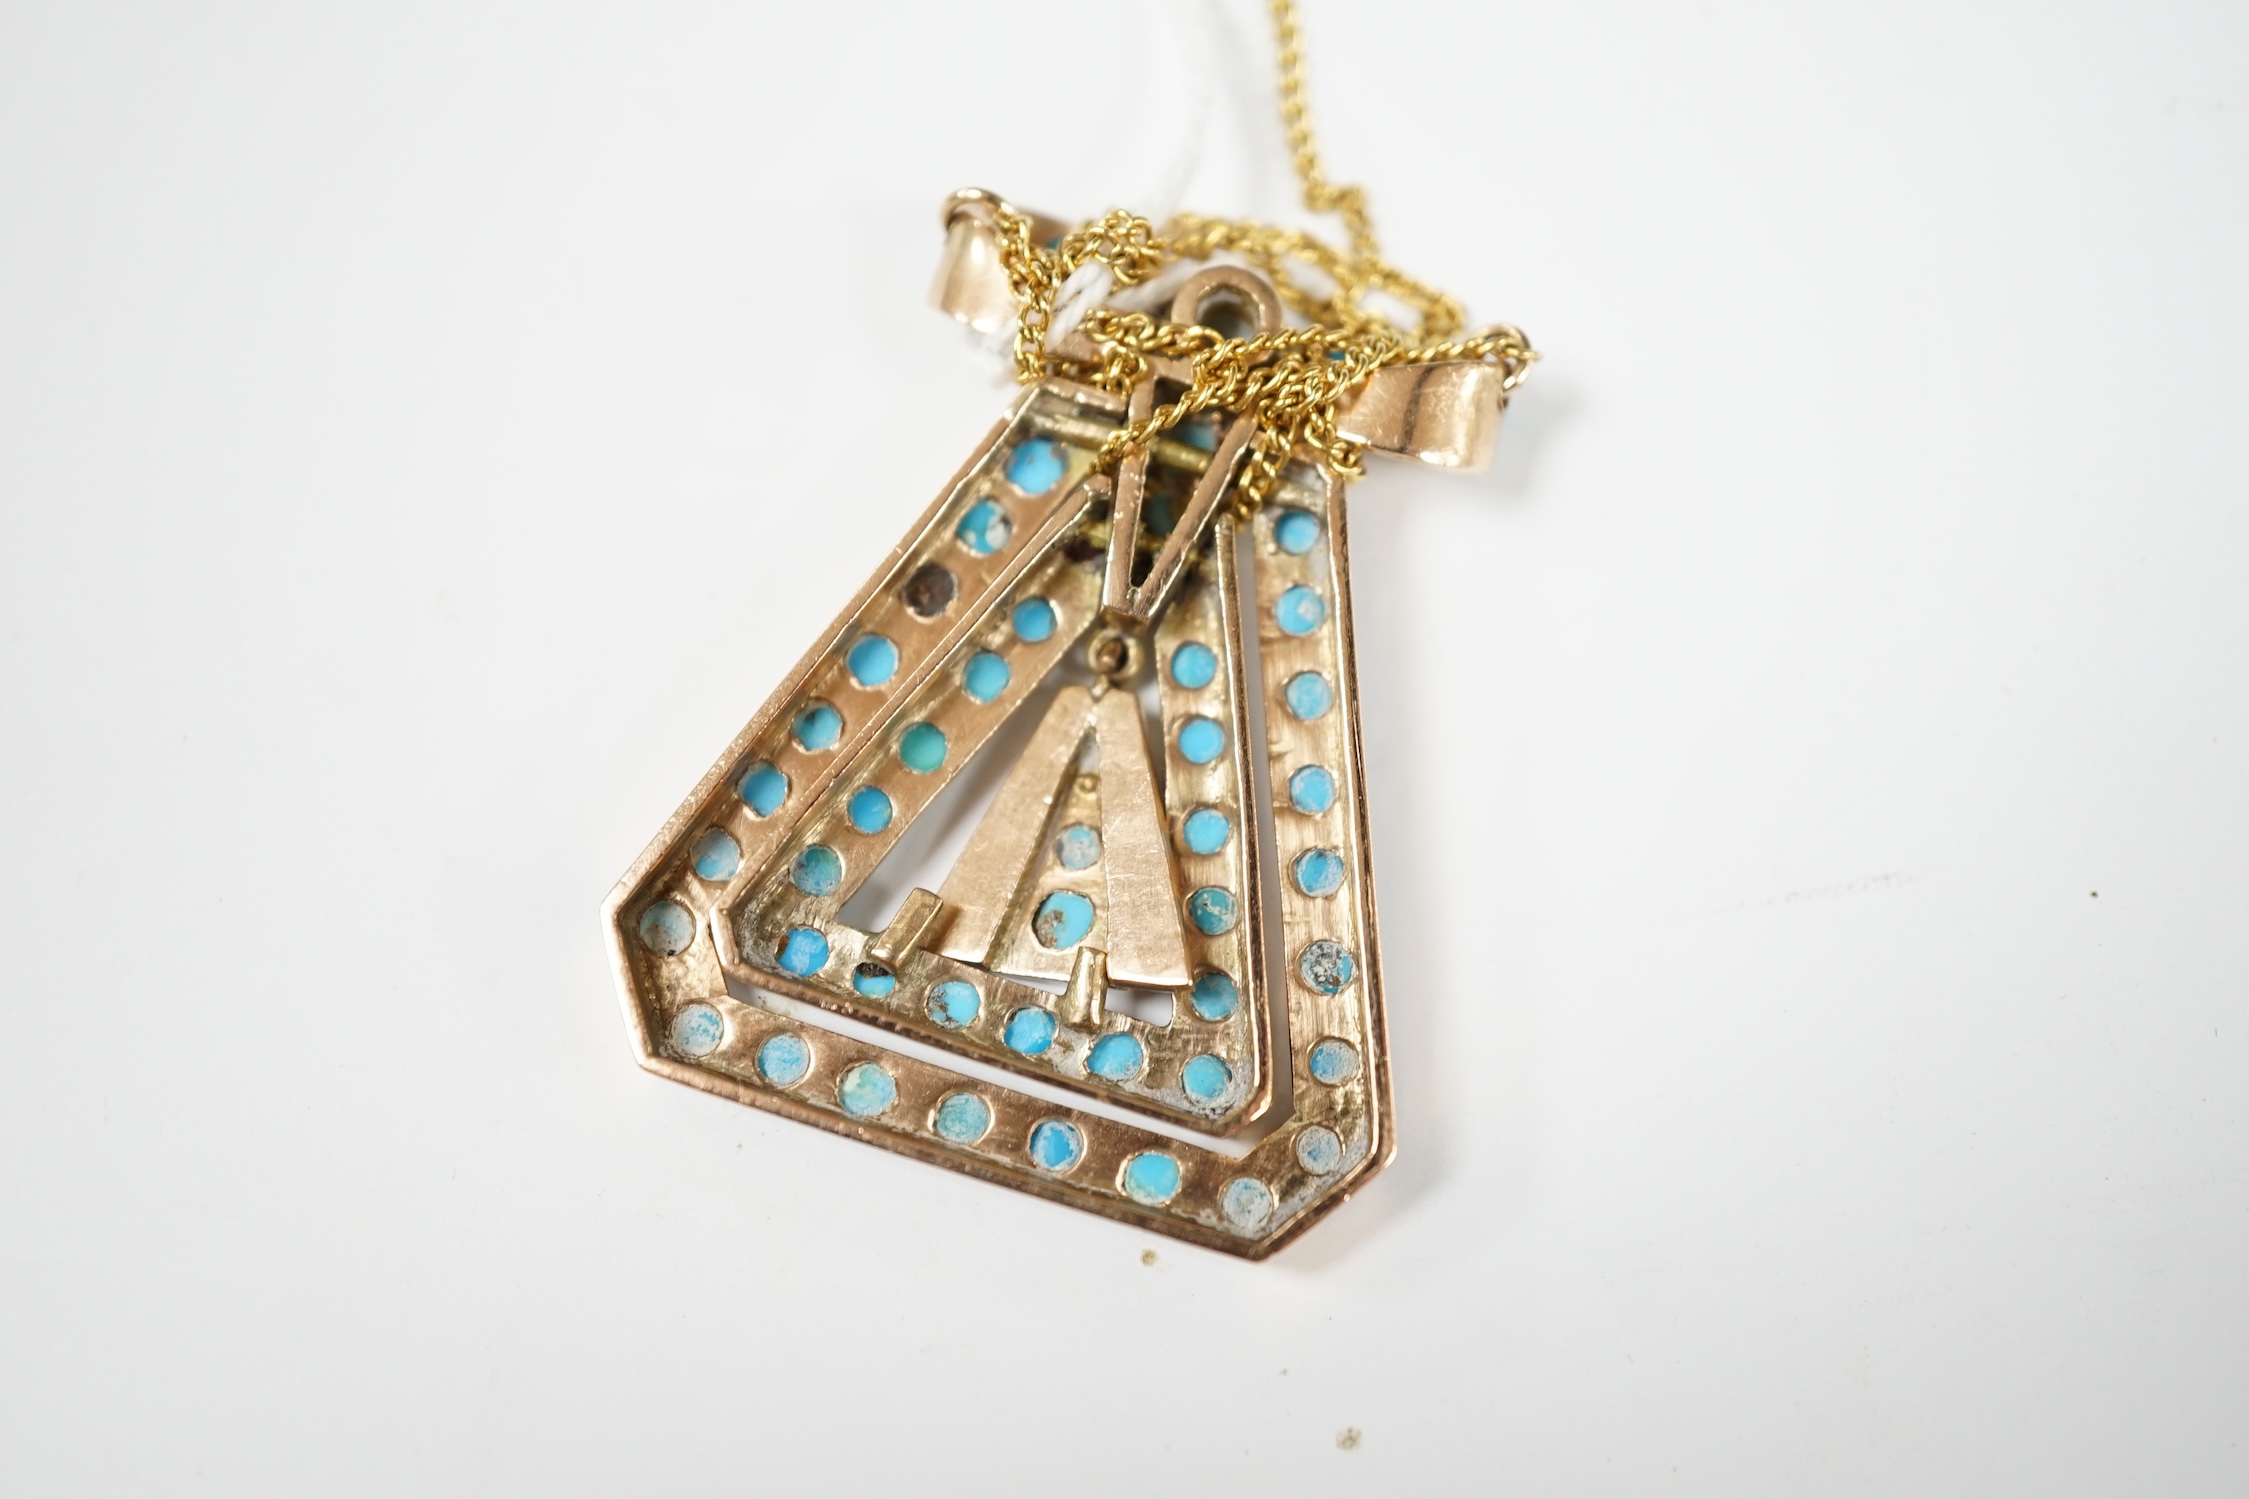 A yellow metal and turquoise cluster set triangular pendant, with ribbon bow terminal, 43mm, on a yellow metal chain. Condition - fair